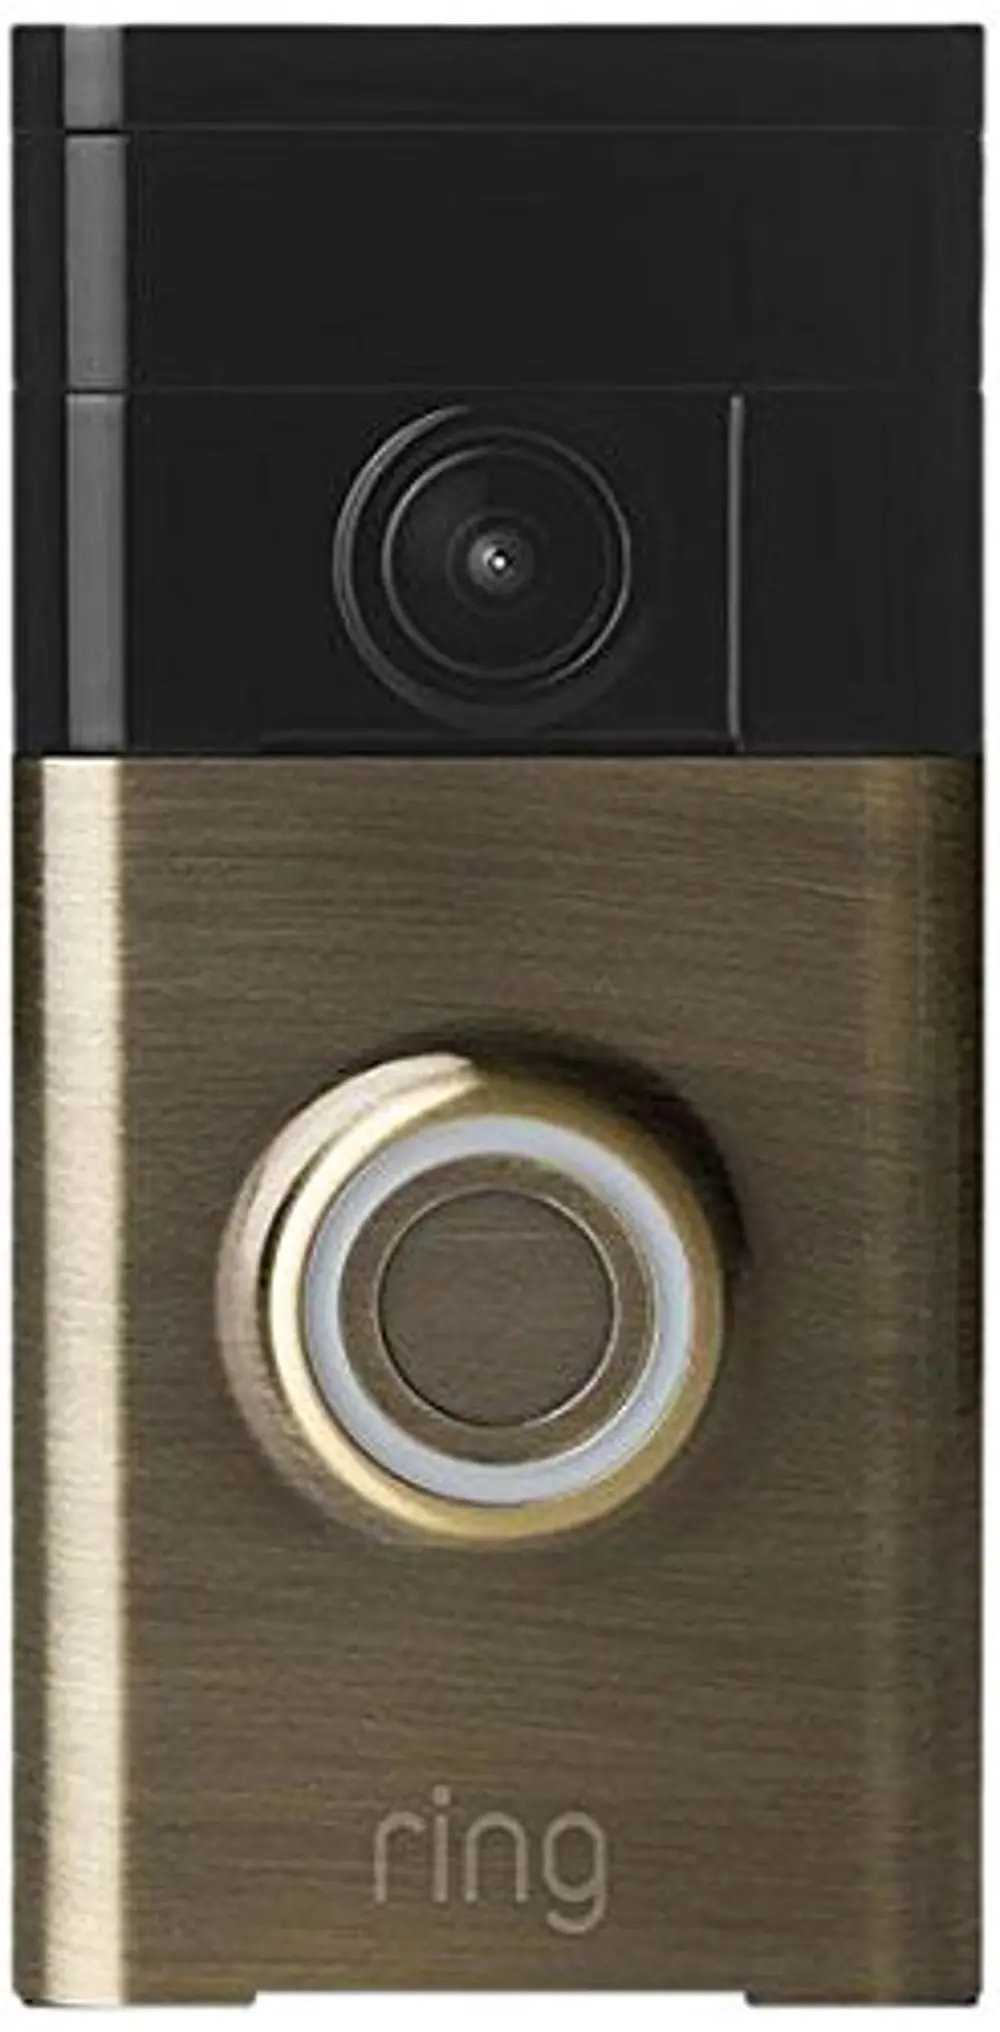 Ring WiFi Enabled Video Doorbell - Antique Brass-1